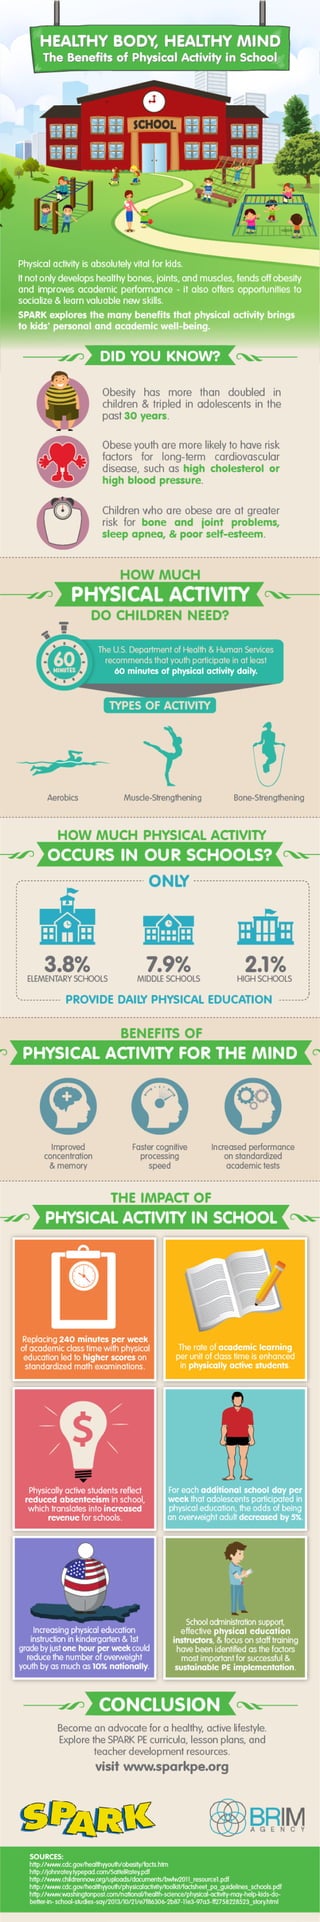  Healthy Body, Healthy Mind - The Benefits of Physical Activity in School (INFOGRAPHIC)